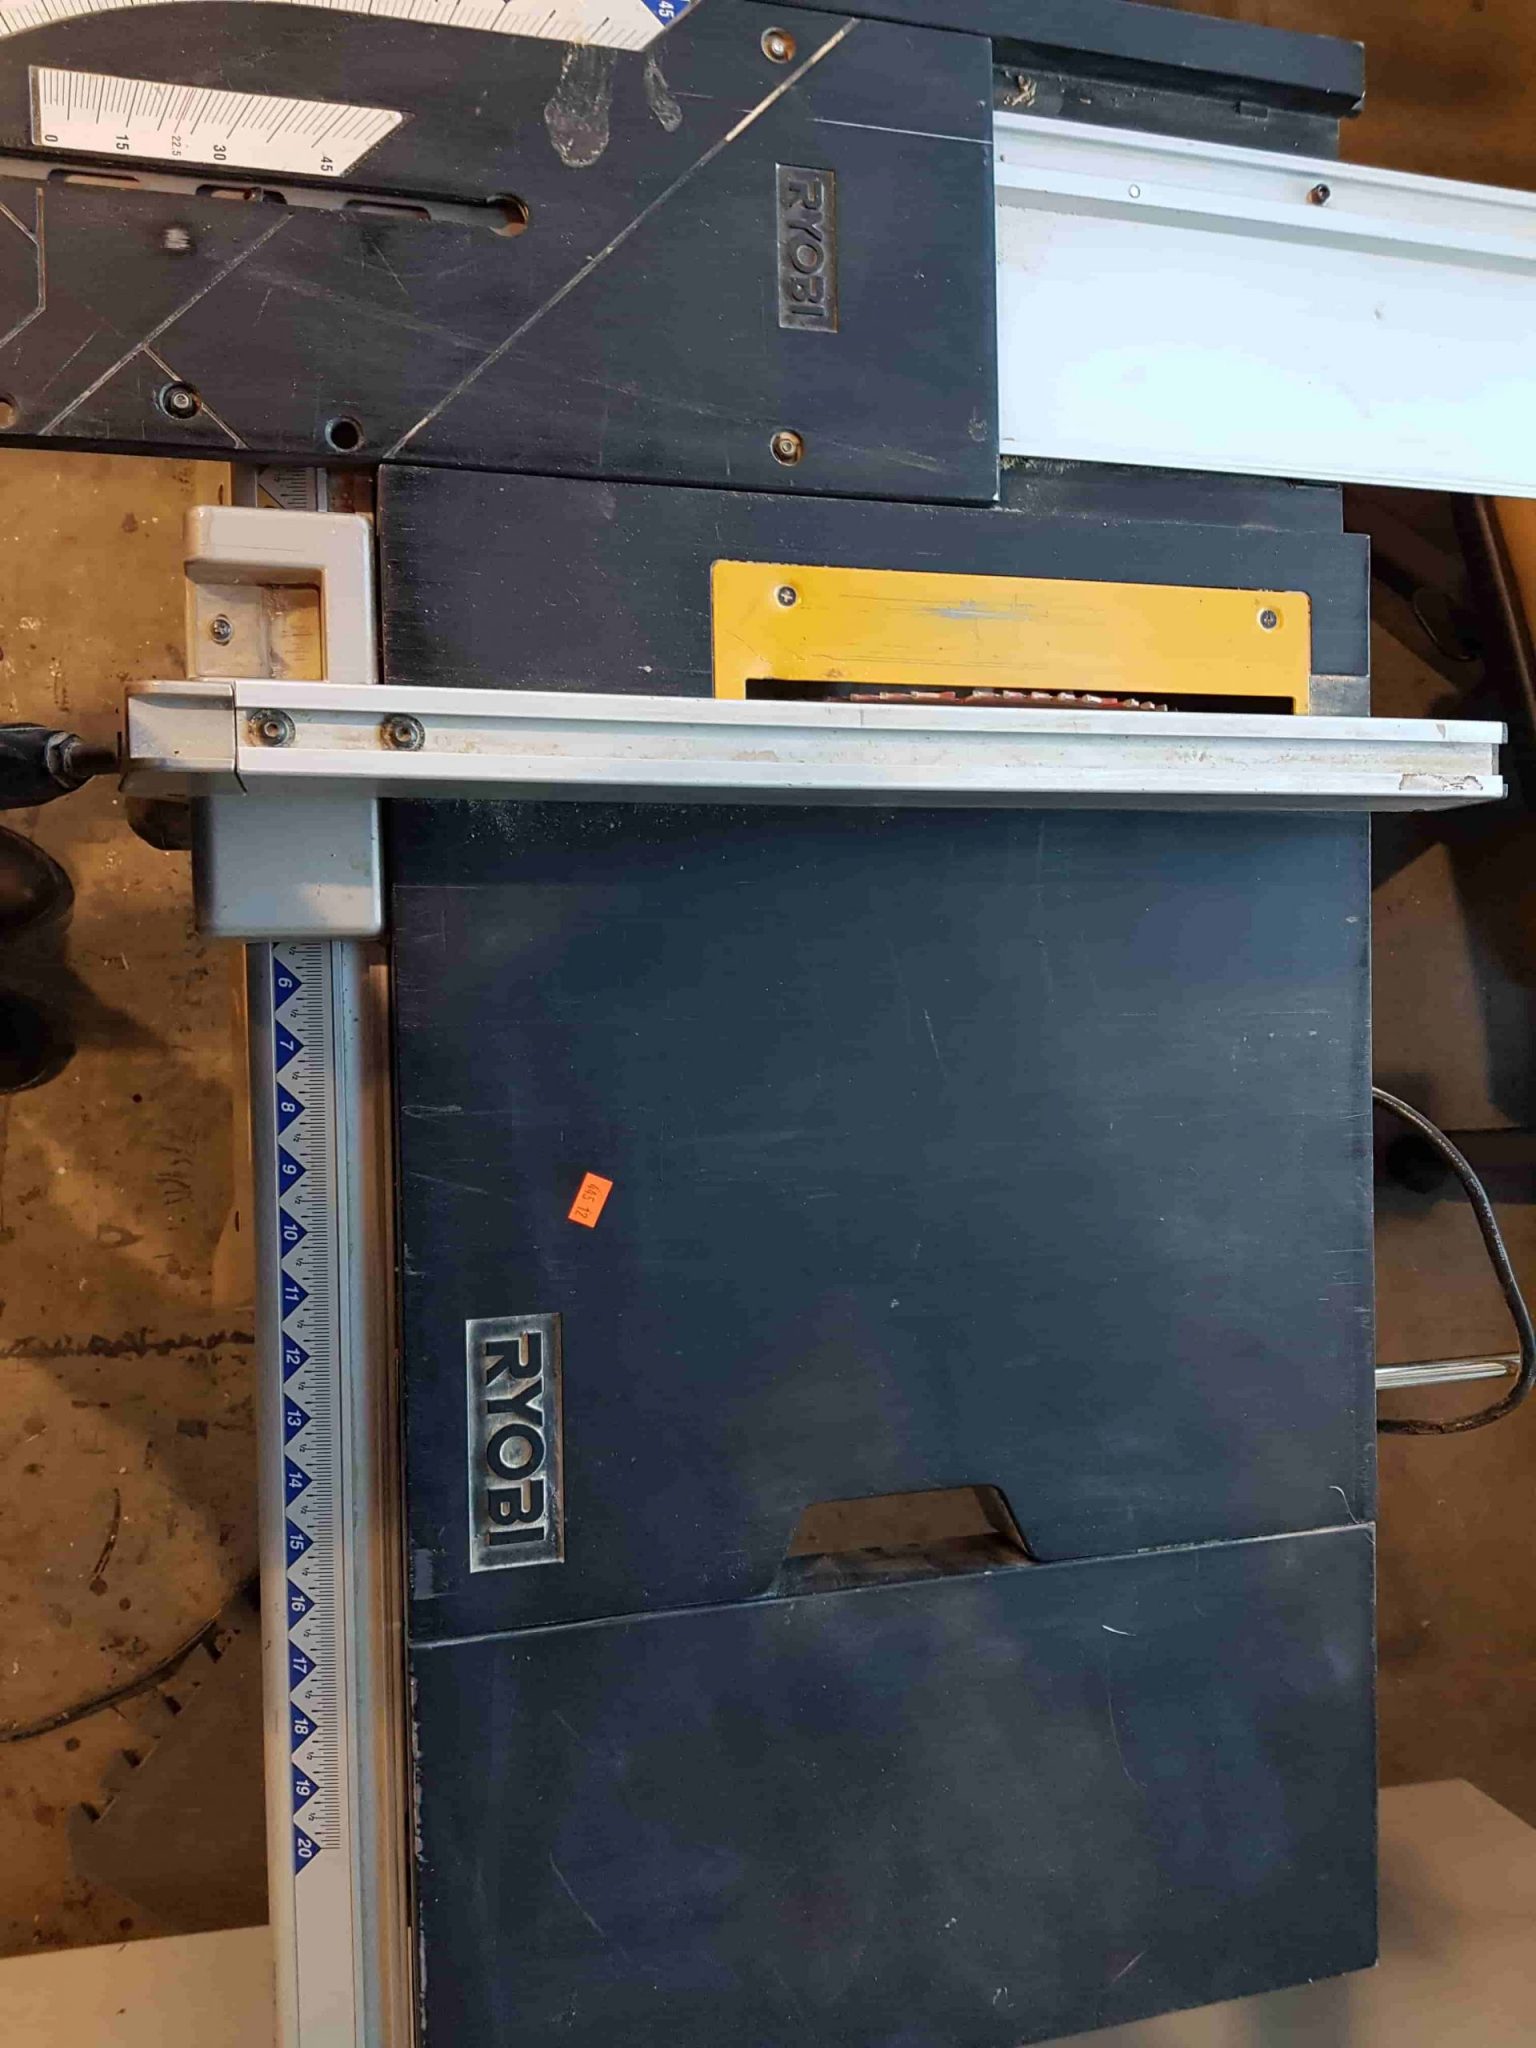 Old Ryobi 10” Table Saw BTS15; give away or trash it? : r/woodworking